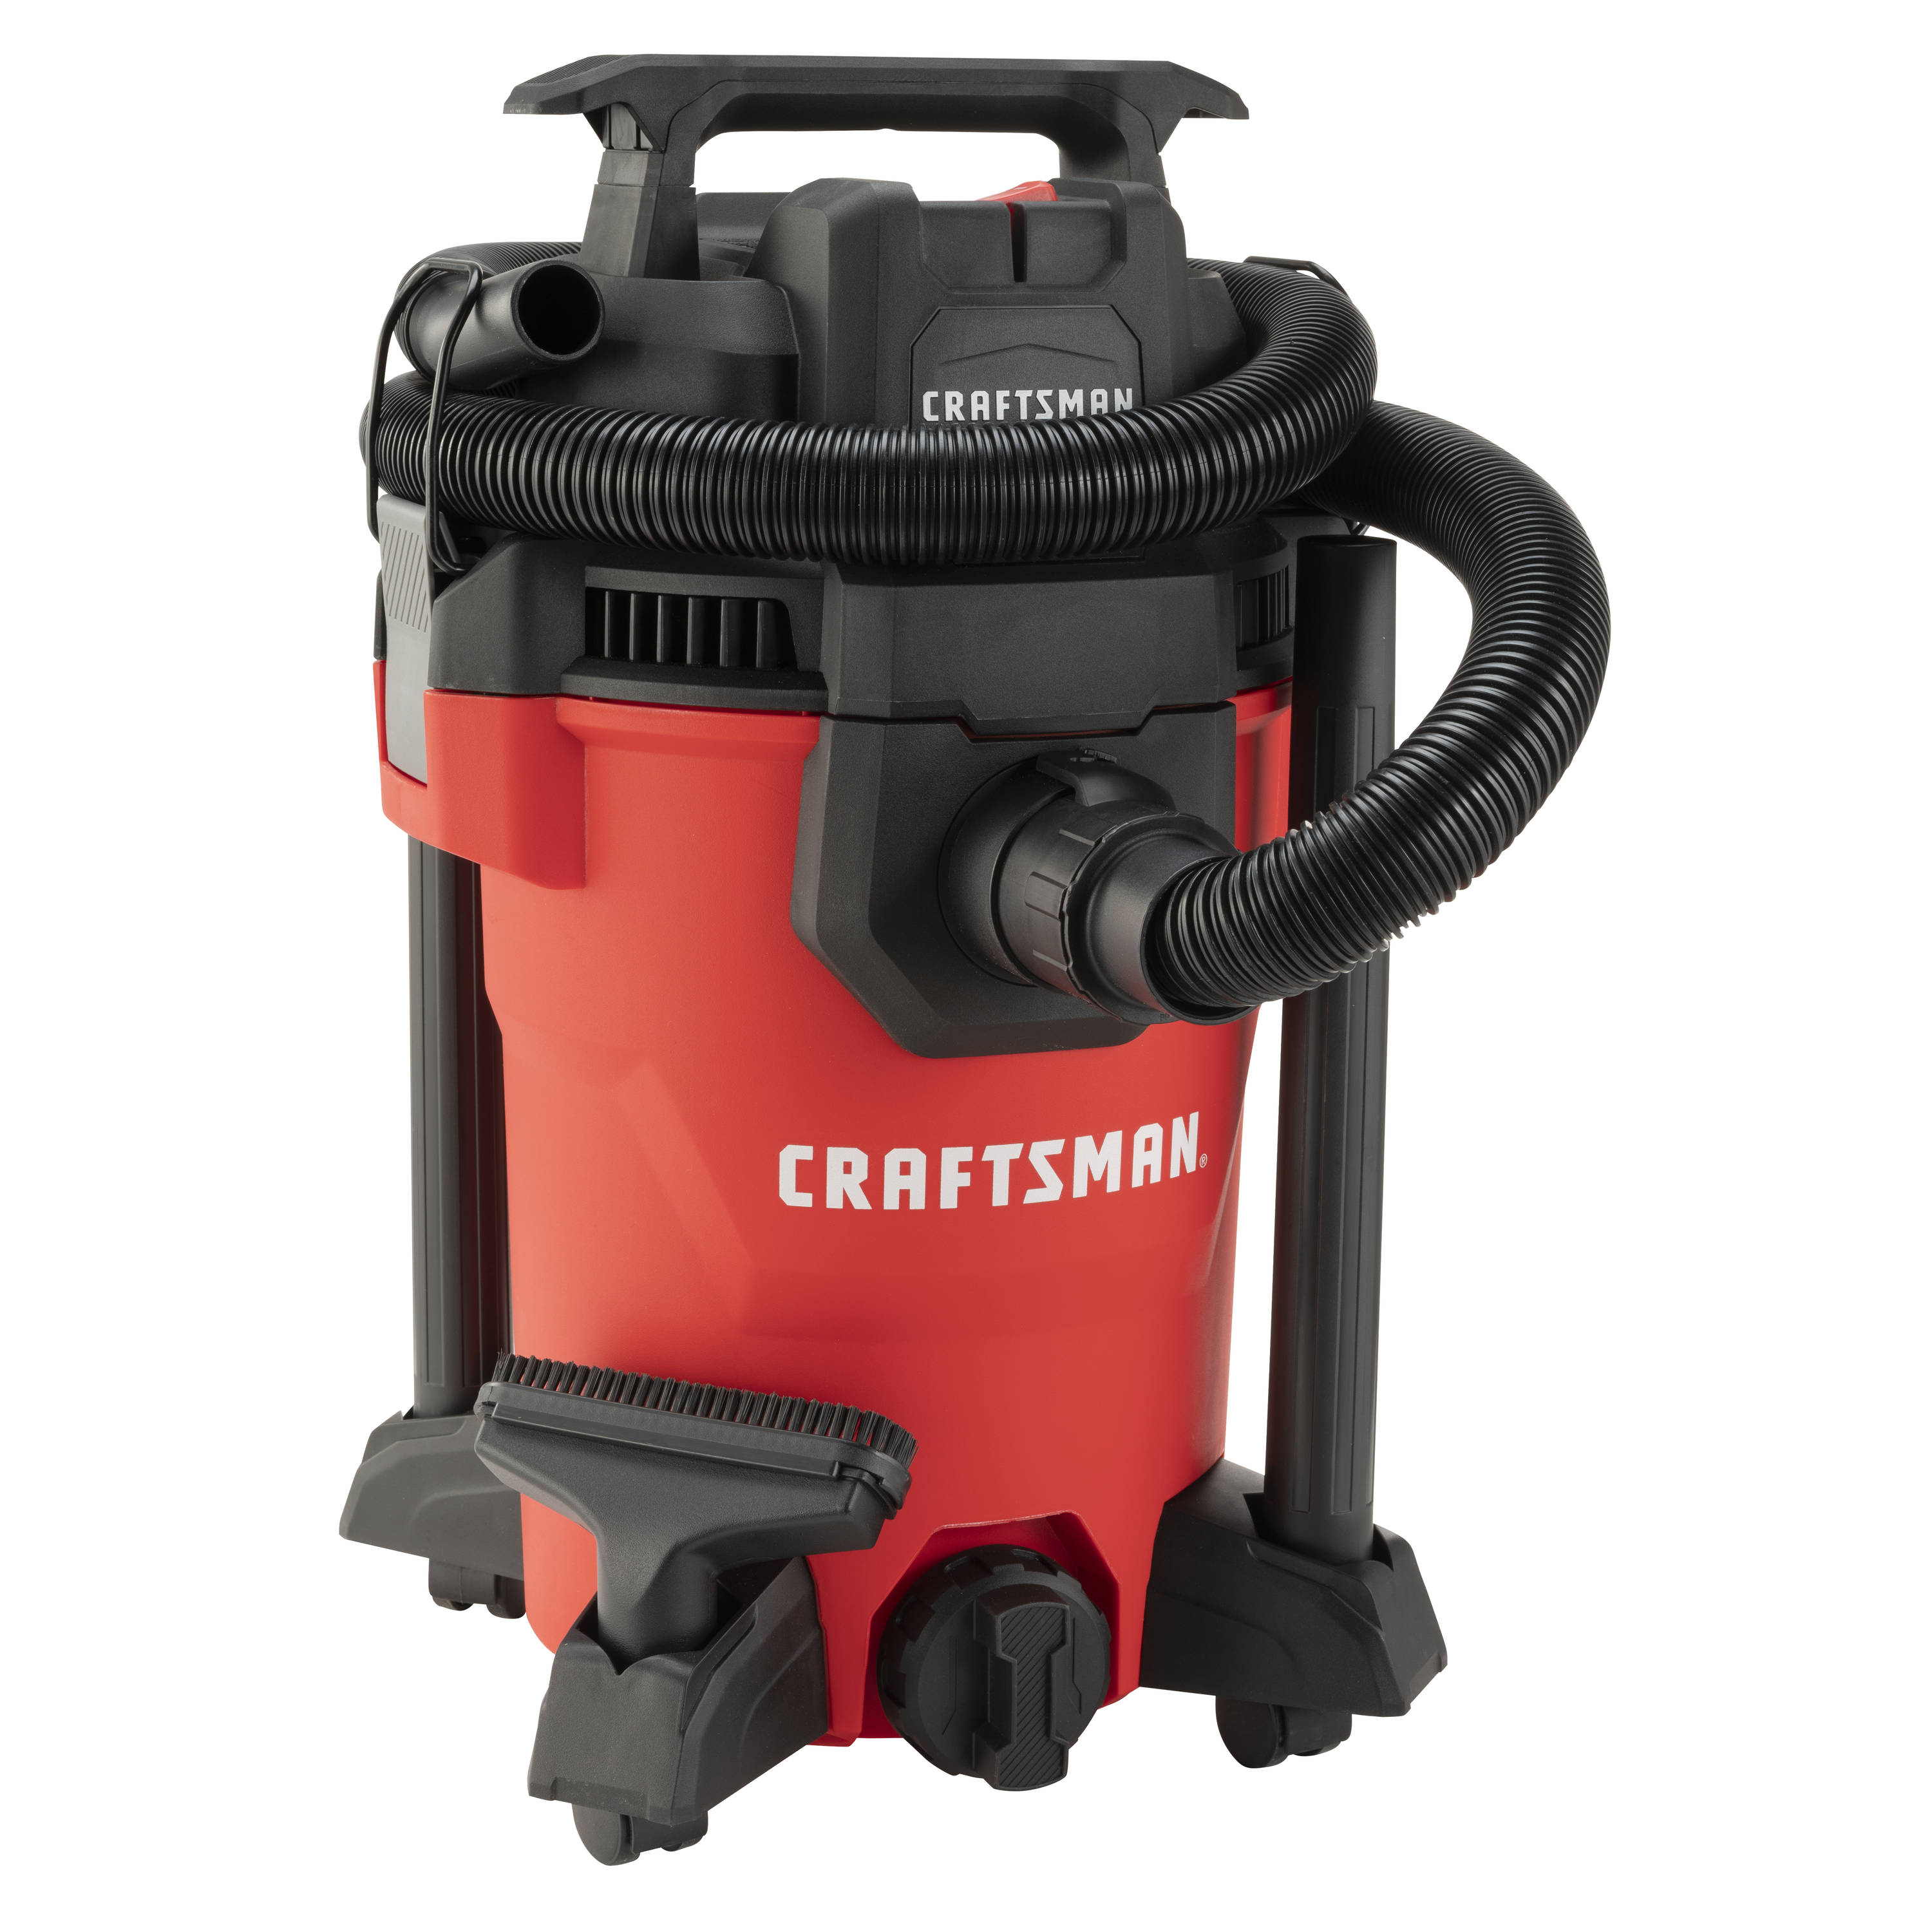 CRAFTSMAN 4-Gallons 3.5-HP Corded Wet/Dry Shop Vacuum with Accessories Included in the Shop 